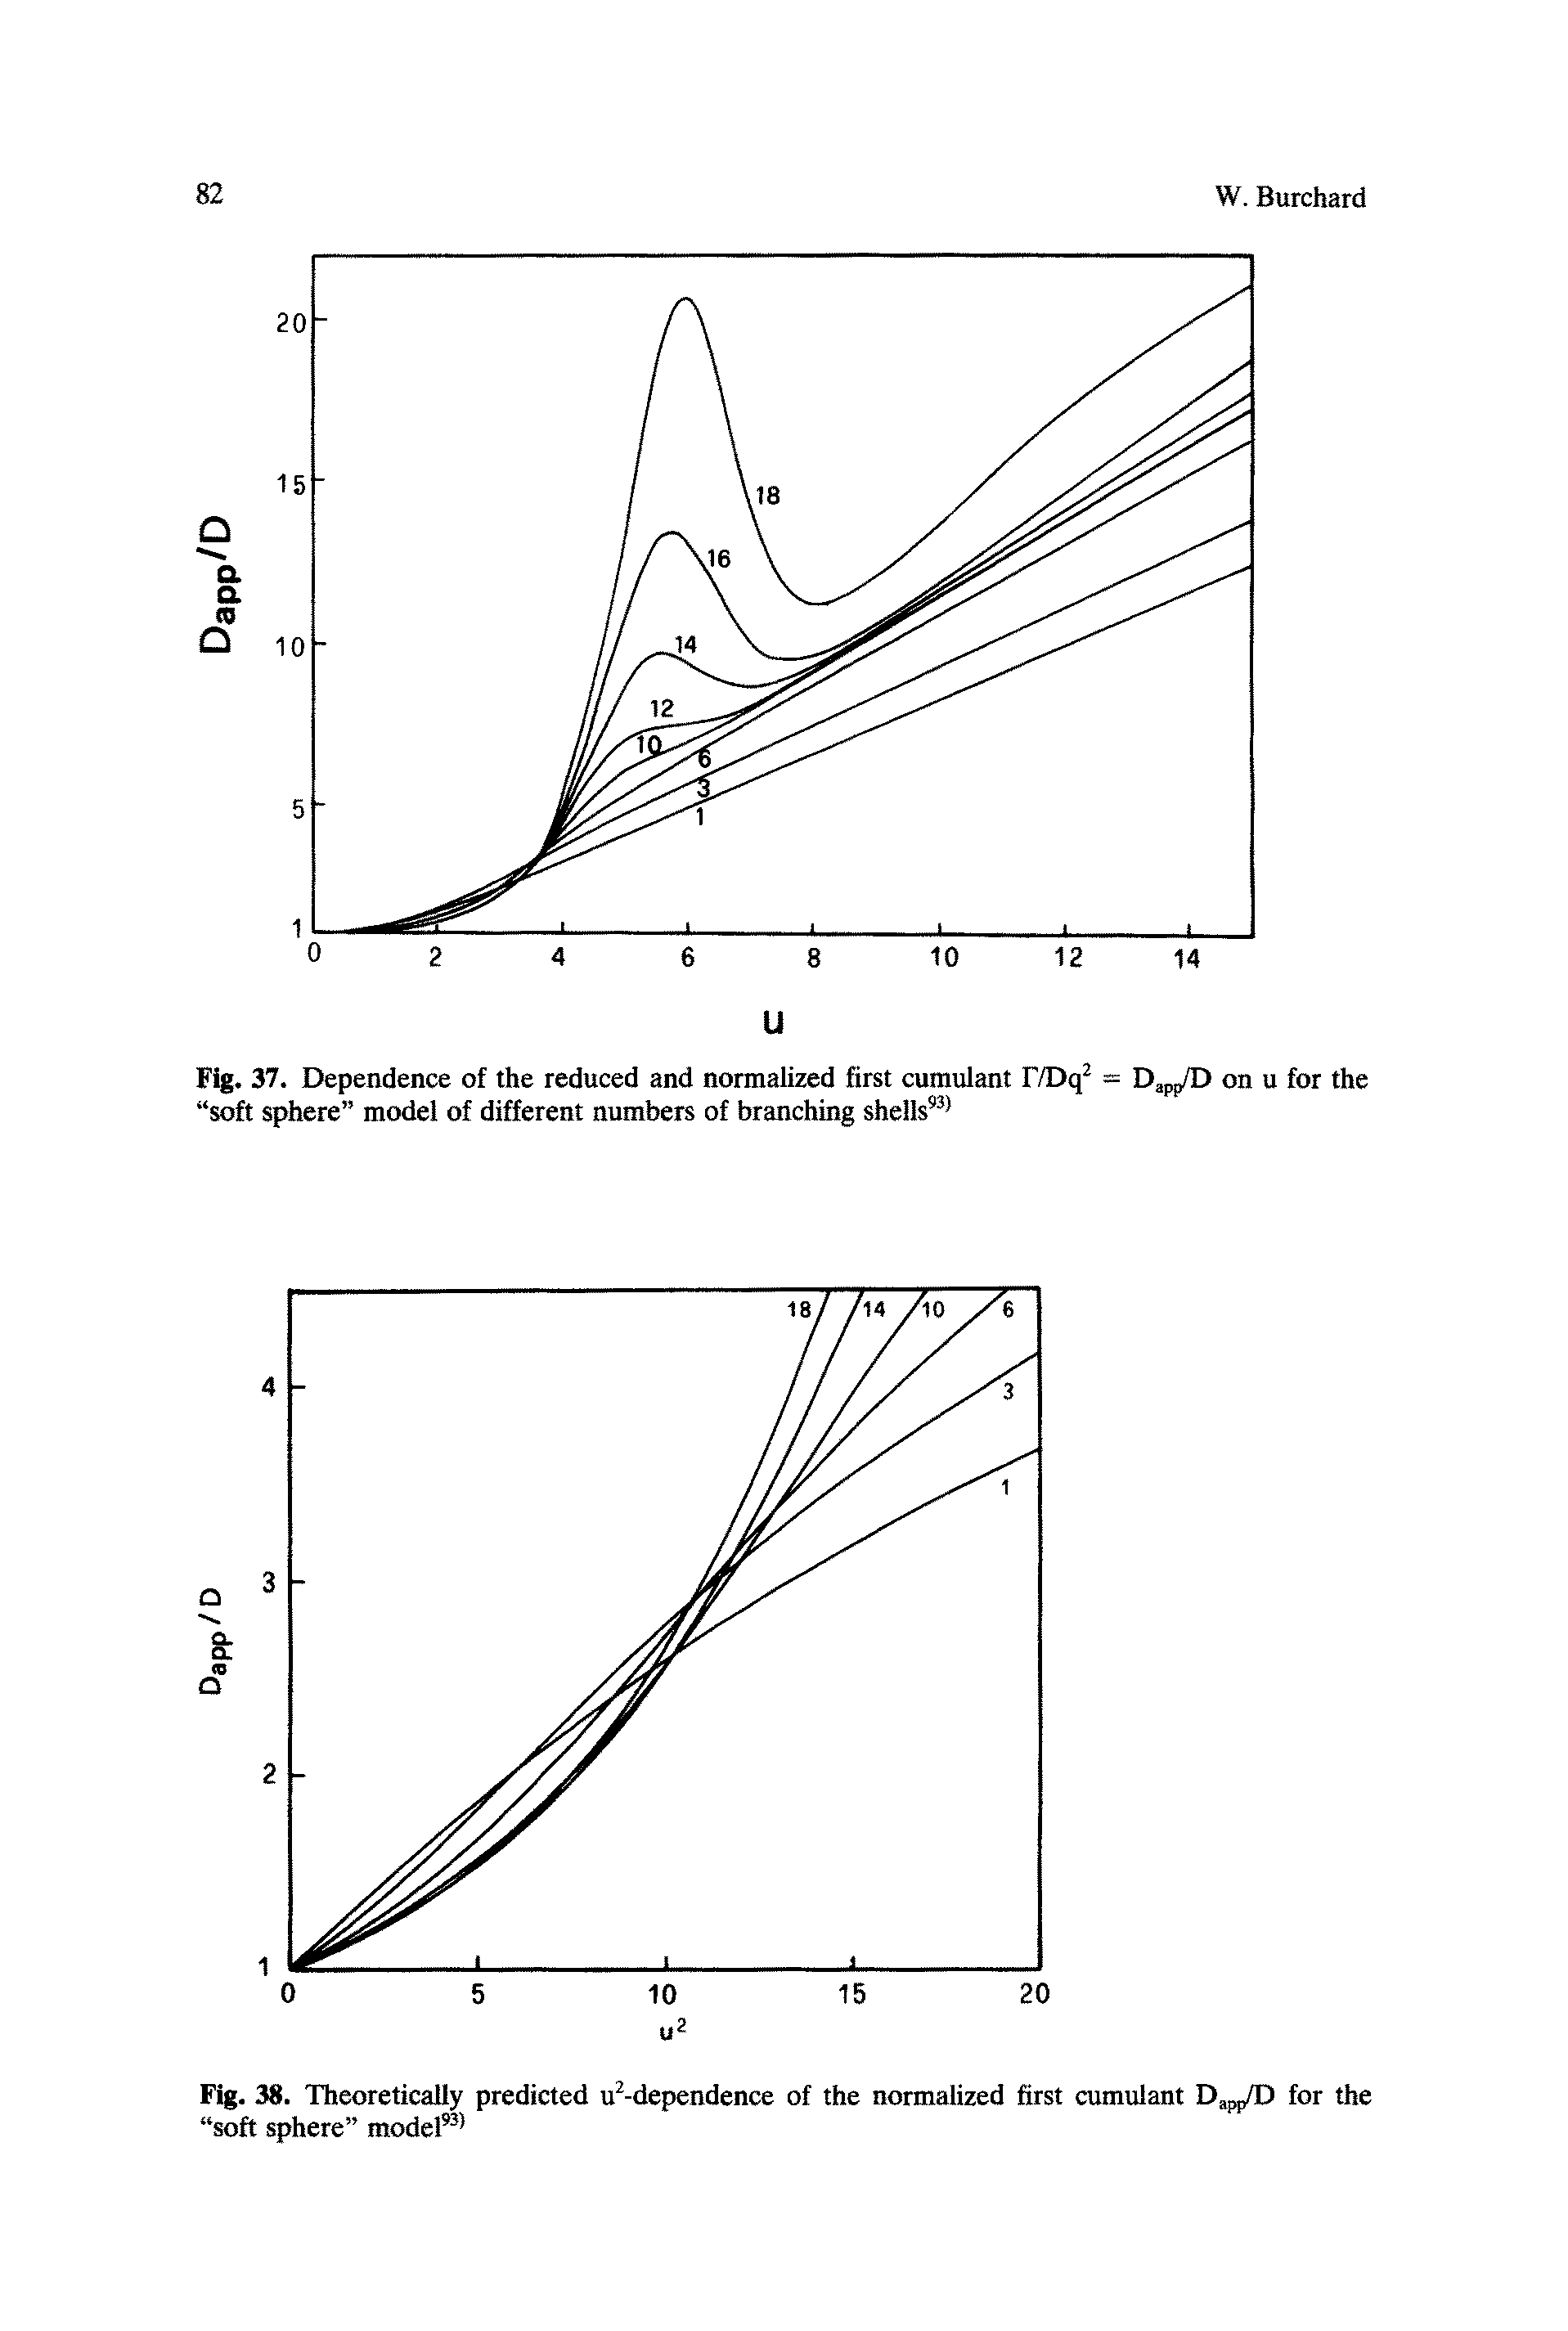 Fig. 37. Dependence of the reduced and normalized first cumulant F/Dq2 = Dap,/D on u for the soft sphere model of different numbers of branching shells93 ...